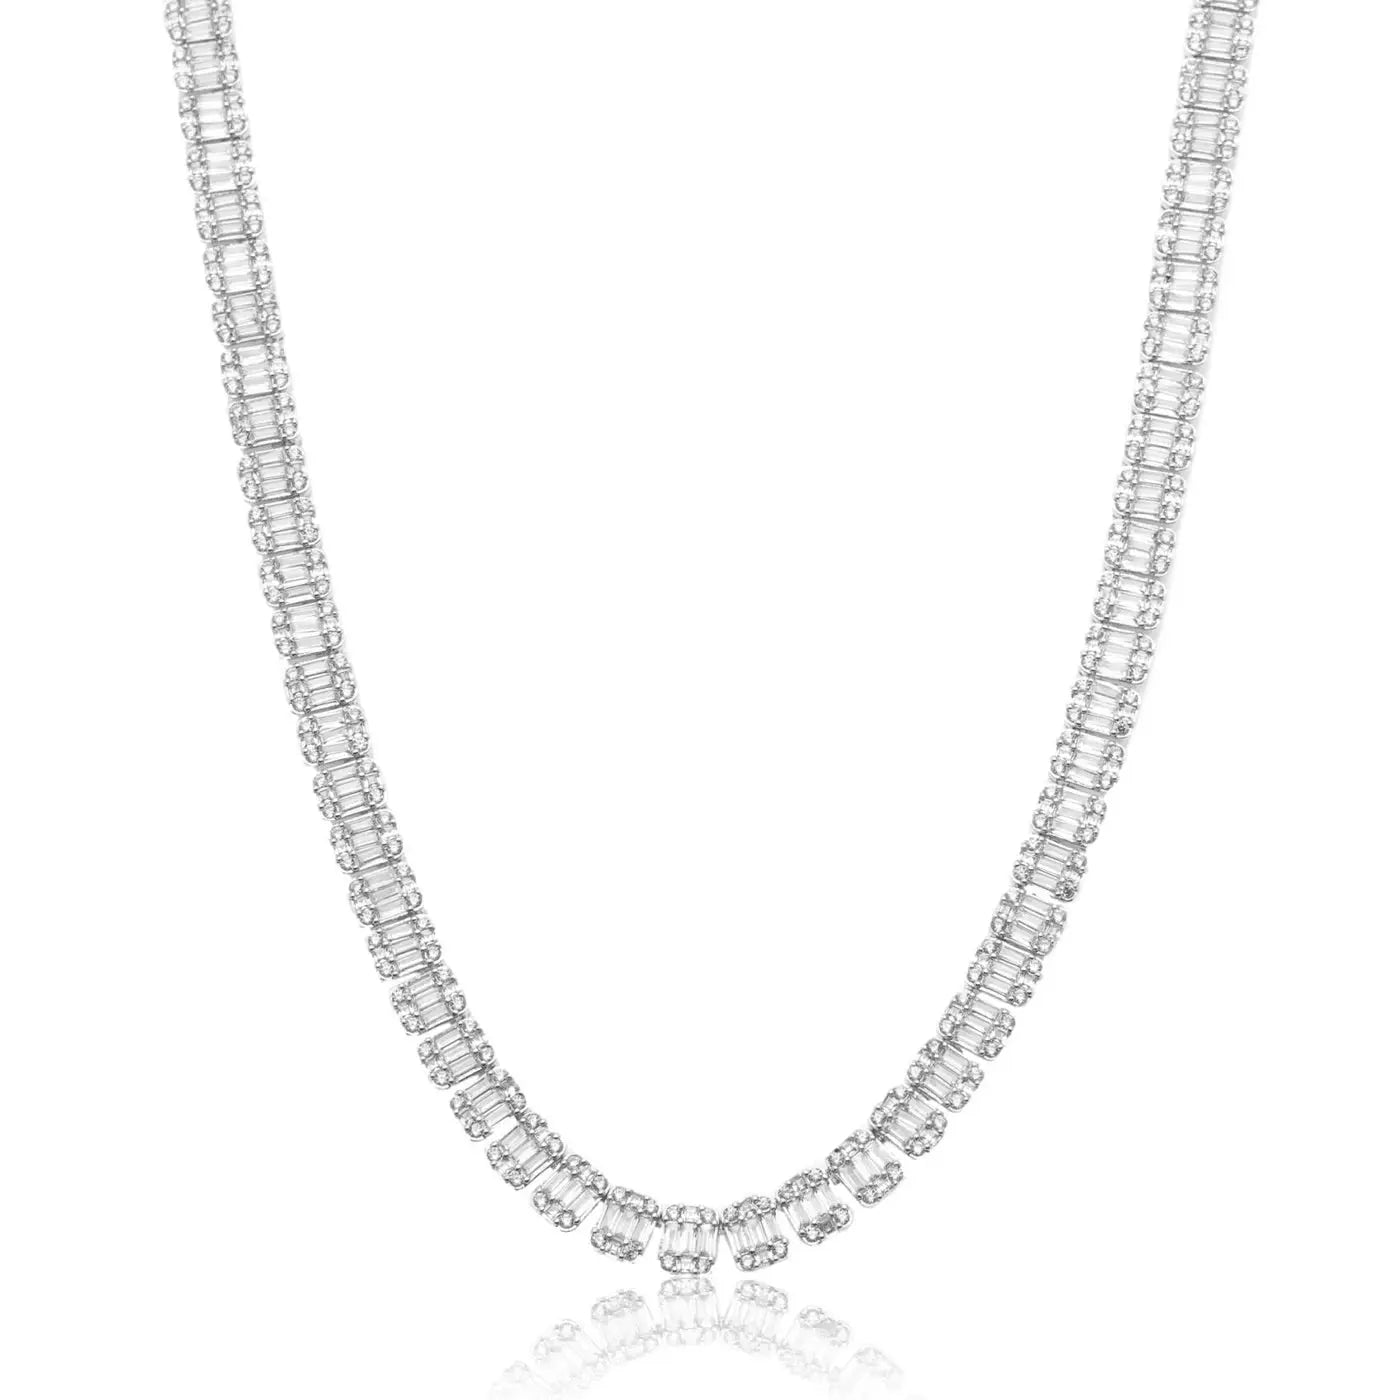  Tyresse 8mm Baguette Tennis Chain - White Gold